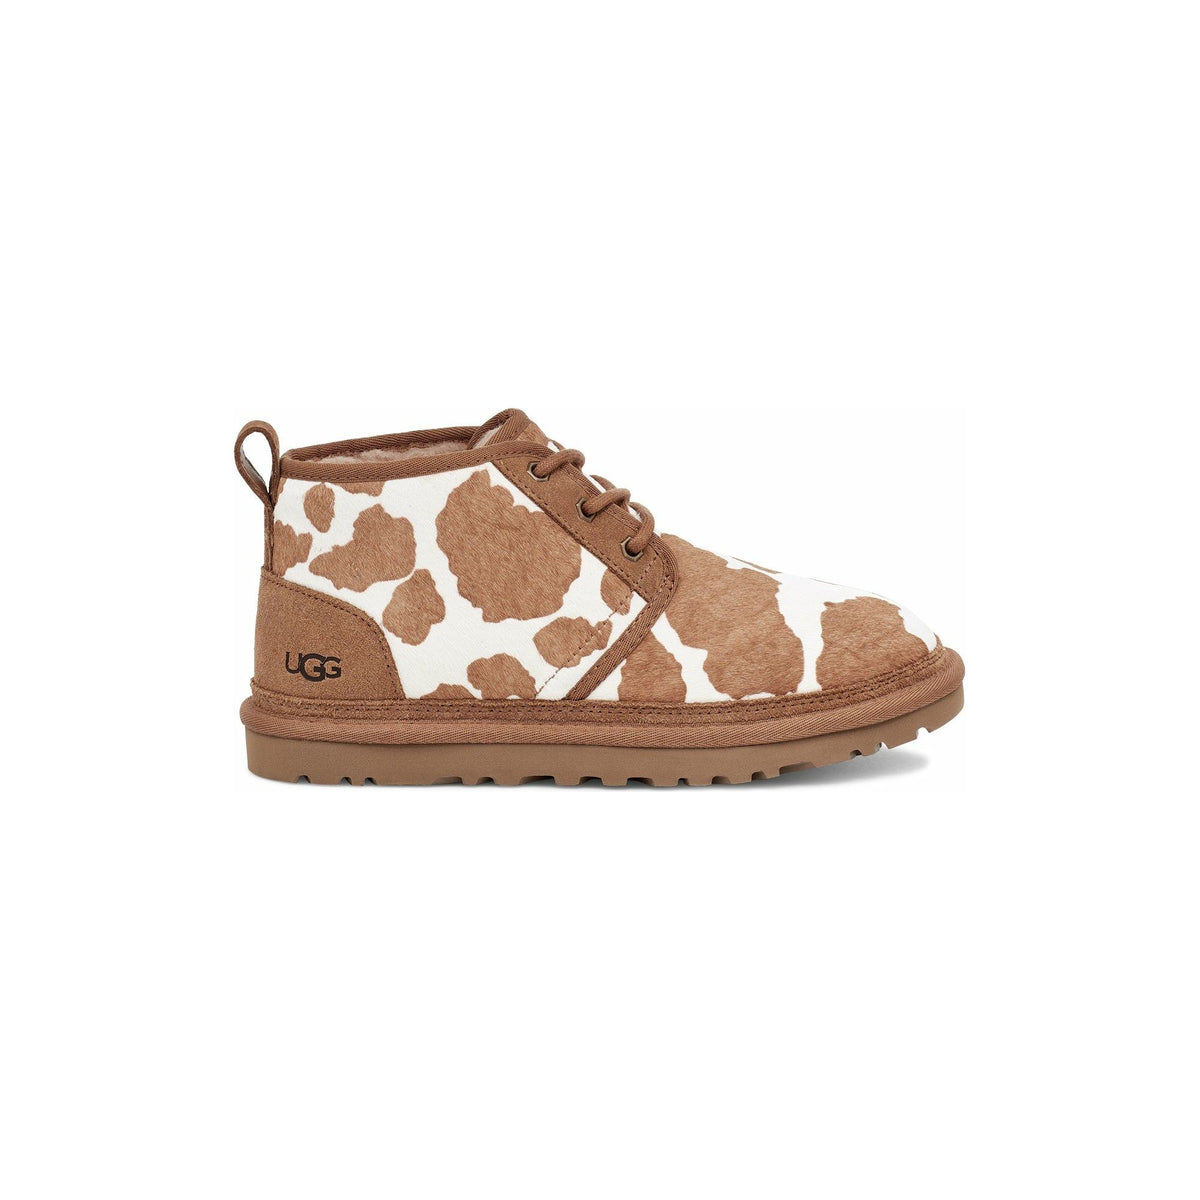 UGG Women's Neumel Cow Print Boot in Mesa/Sand